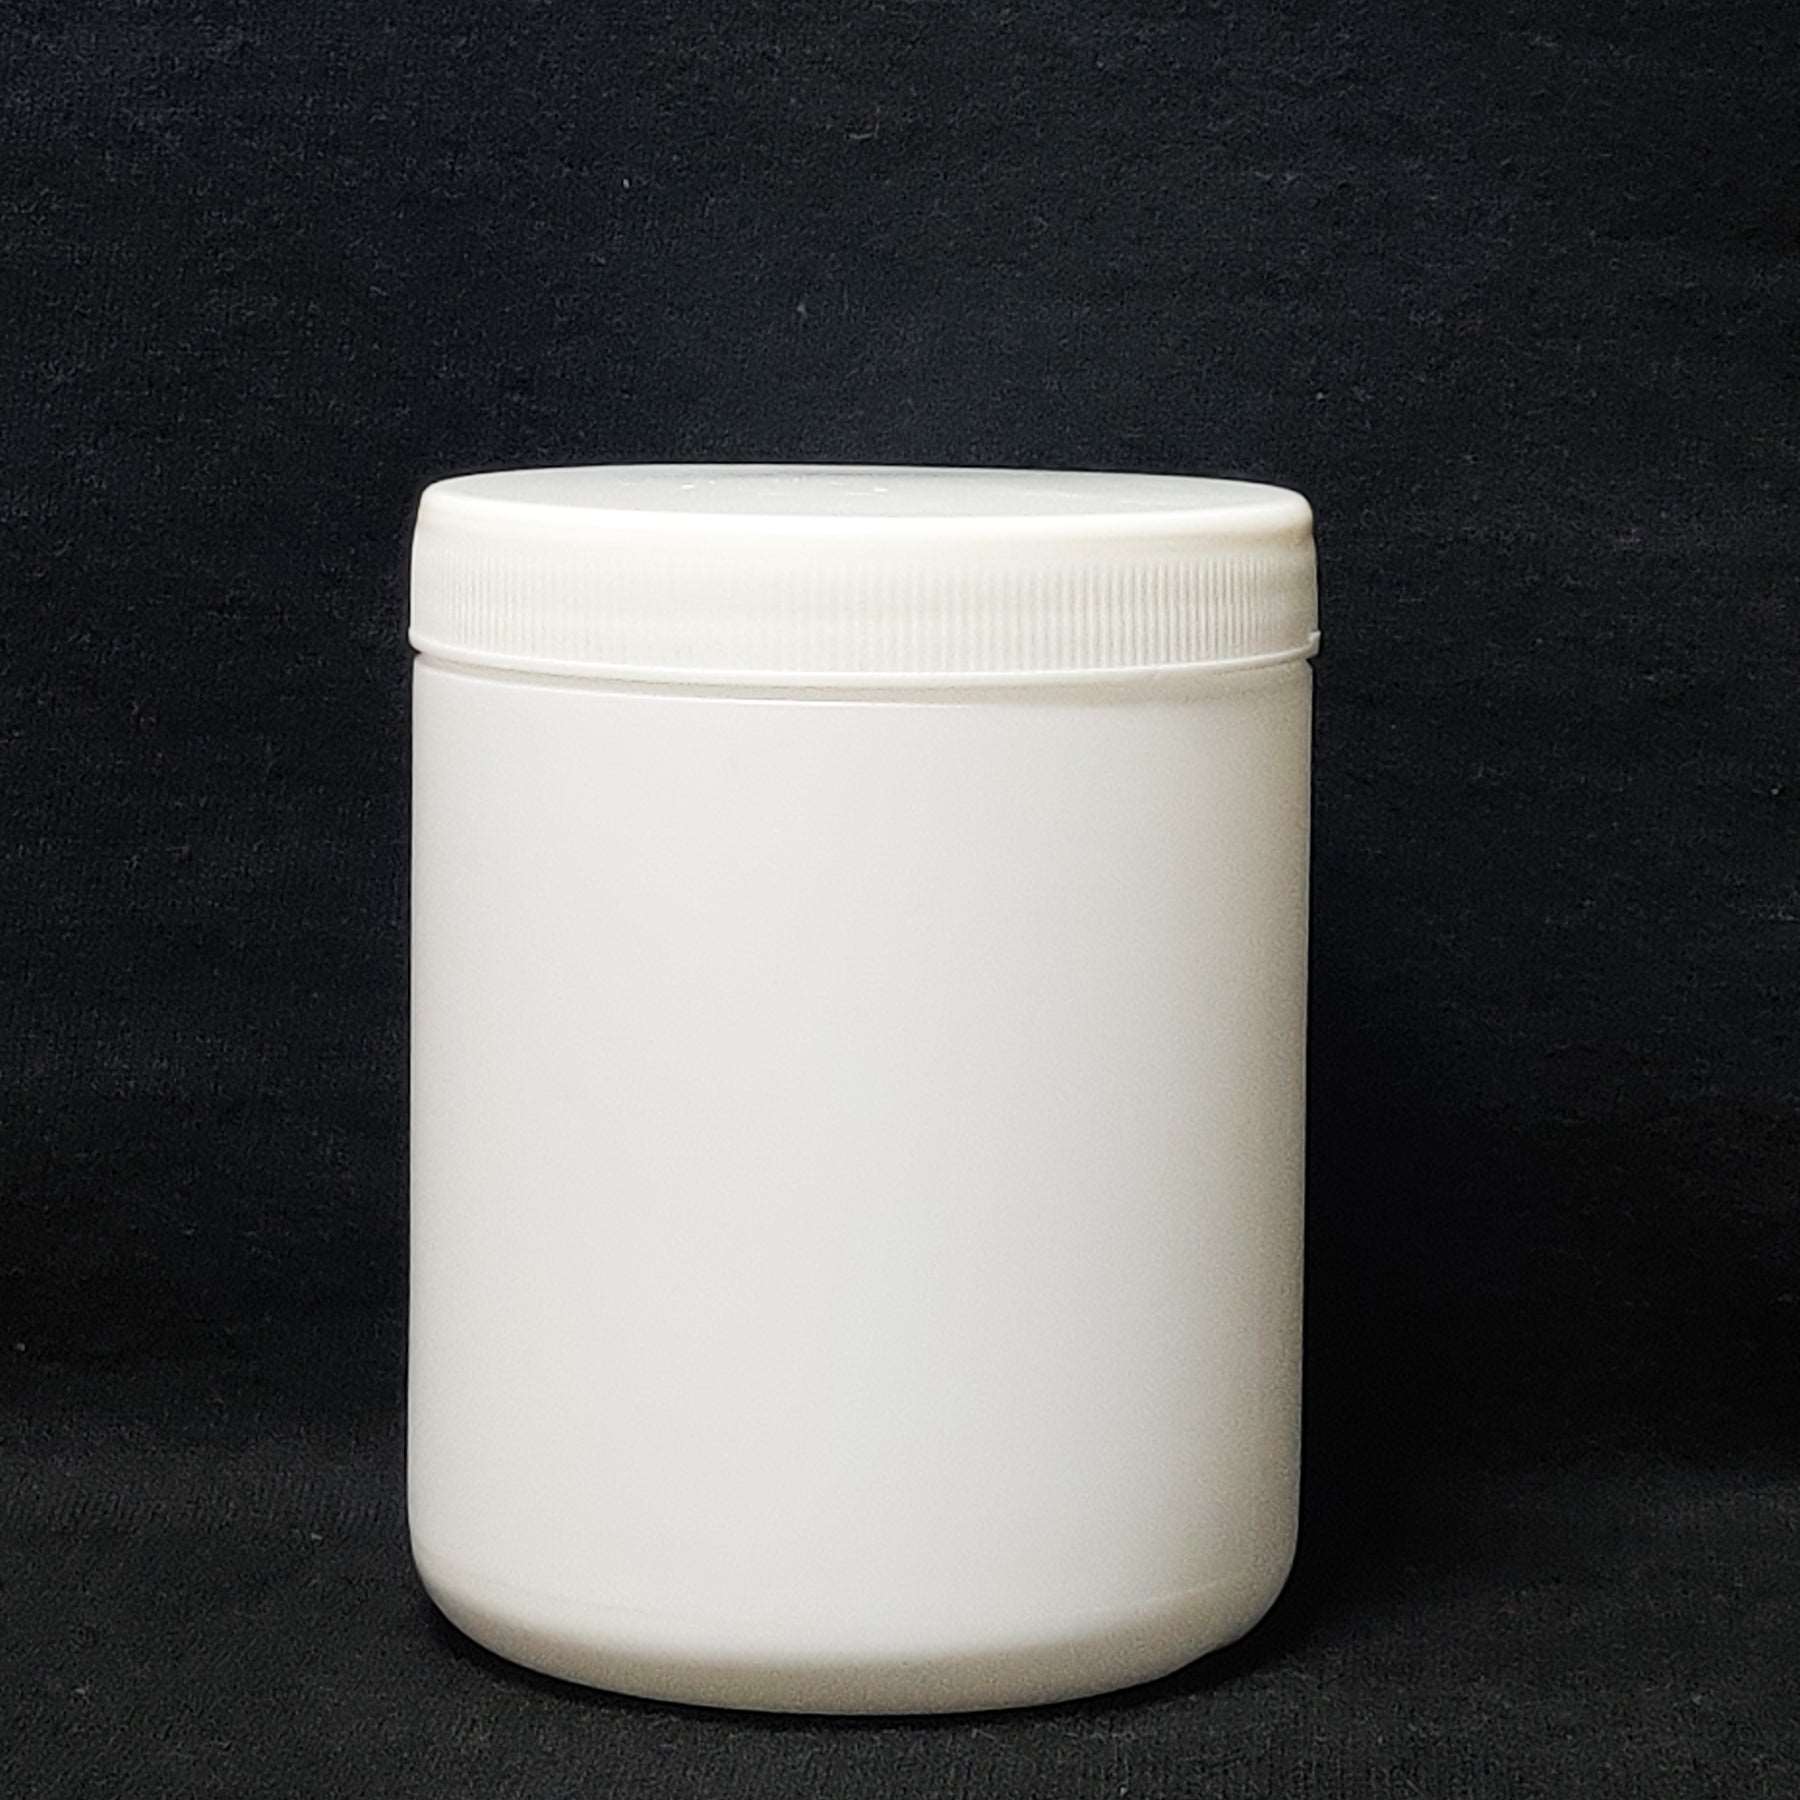 300ml White HDPE Empty Jar for Secure Storage.